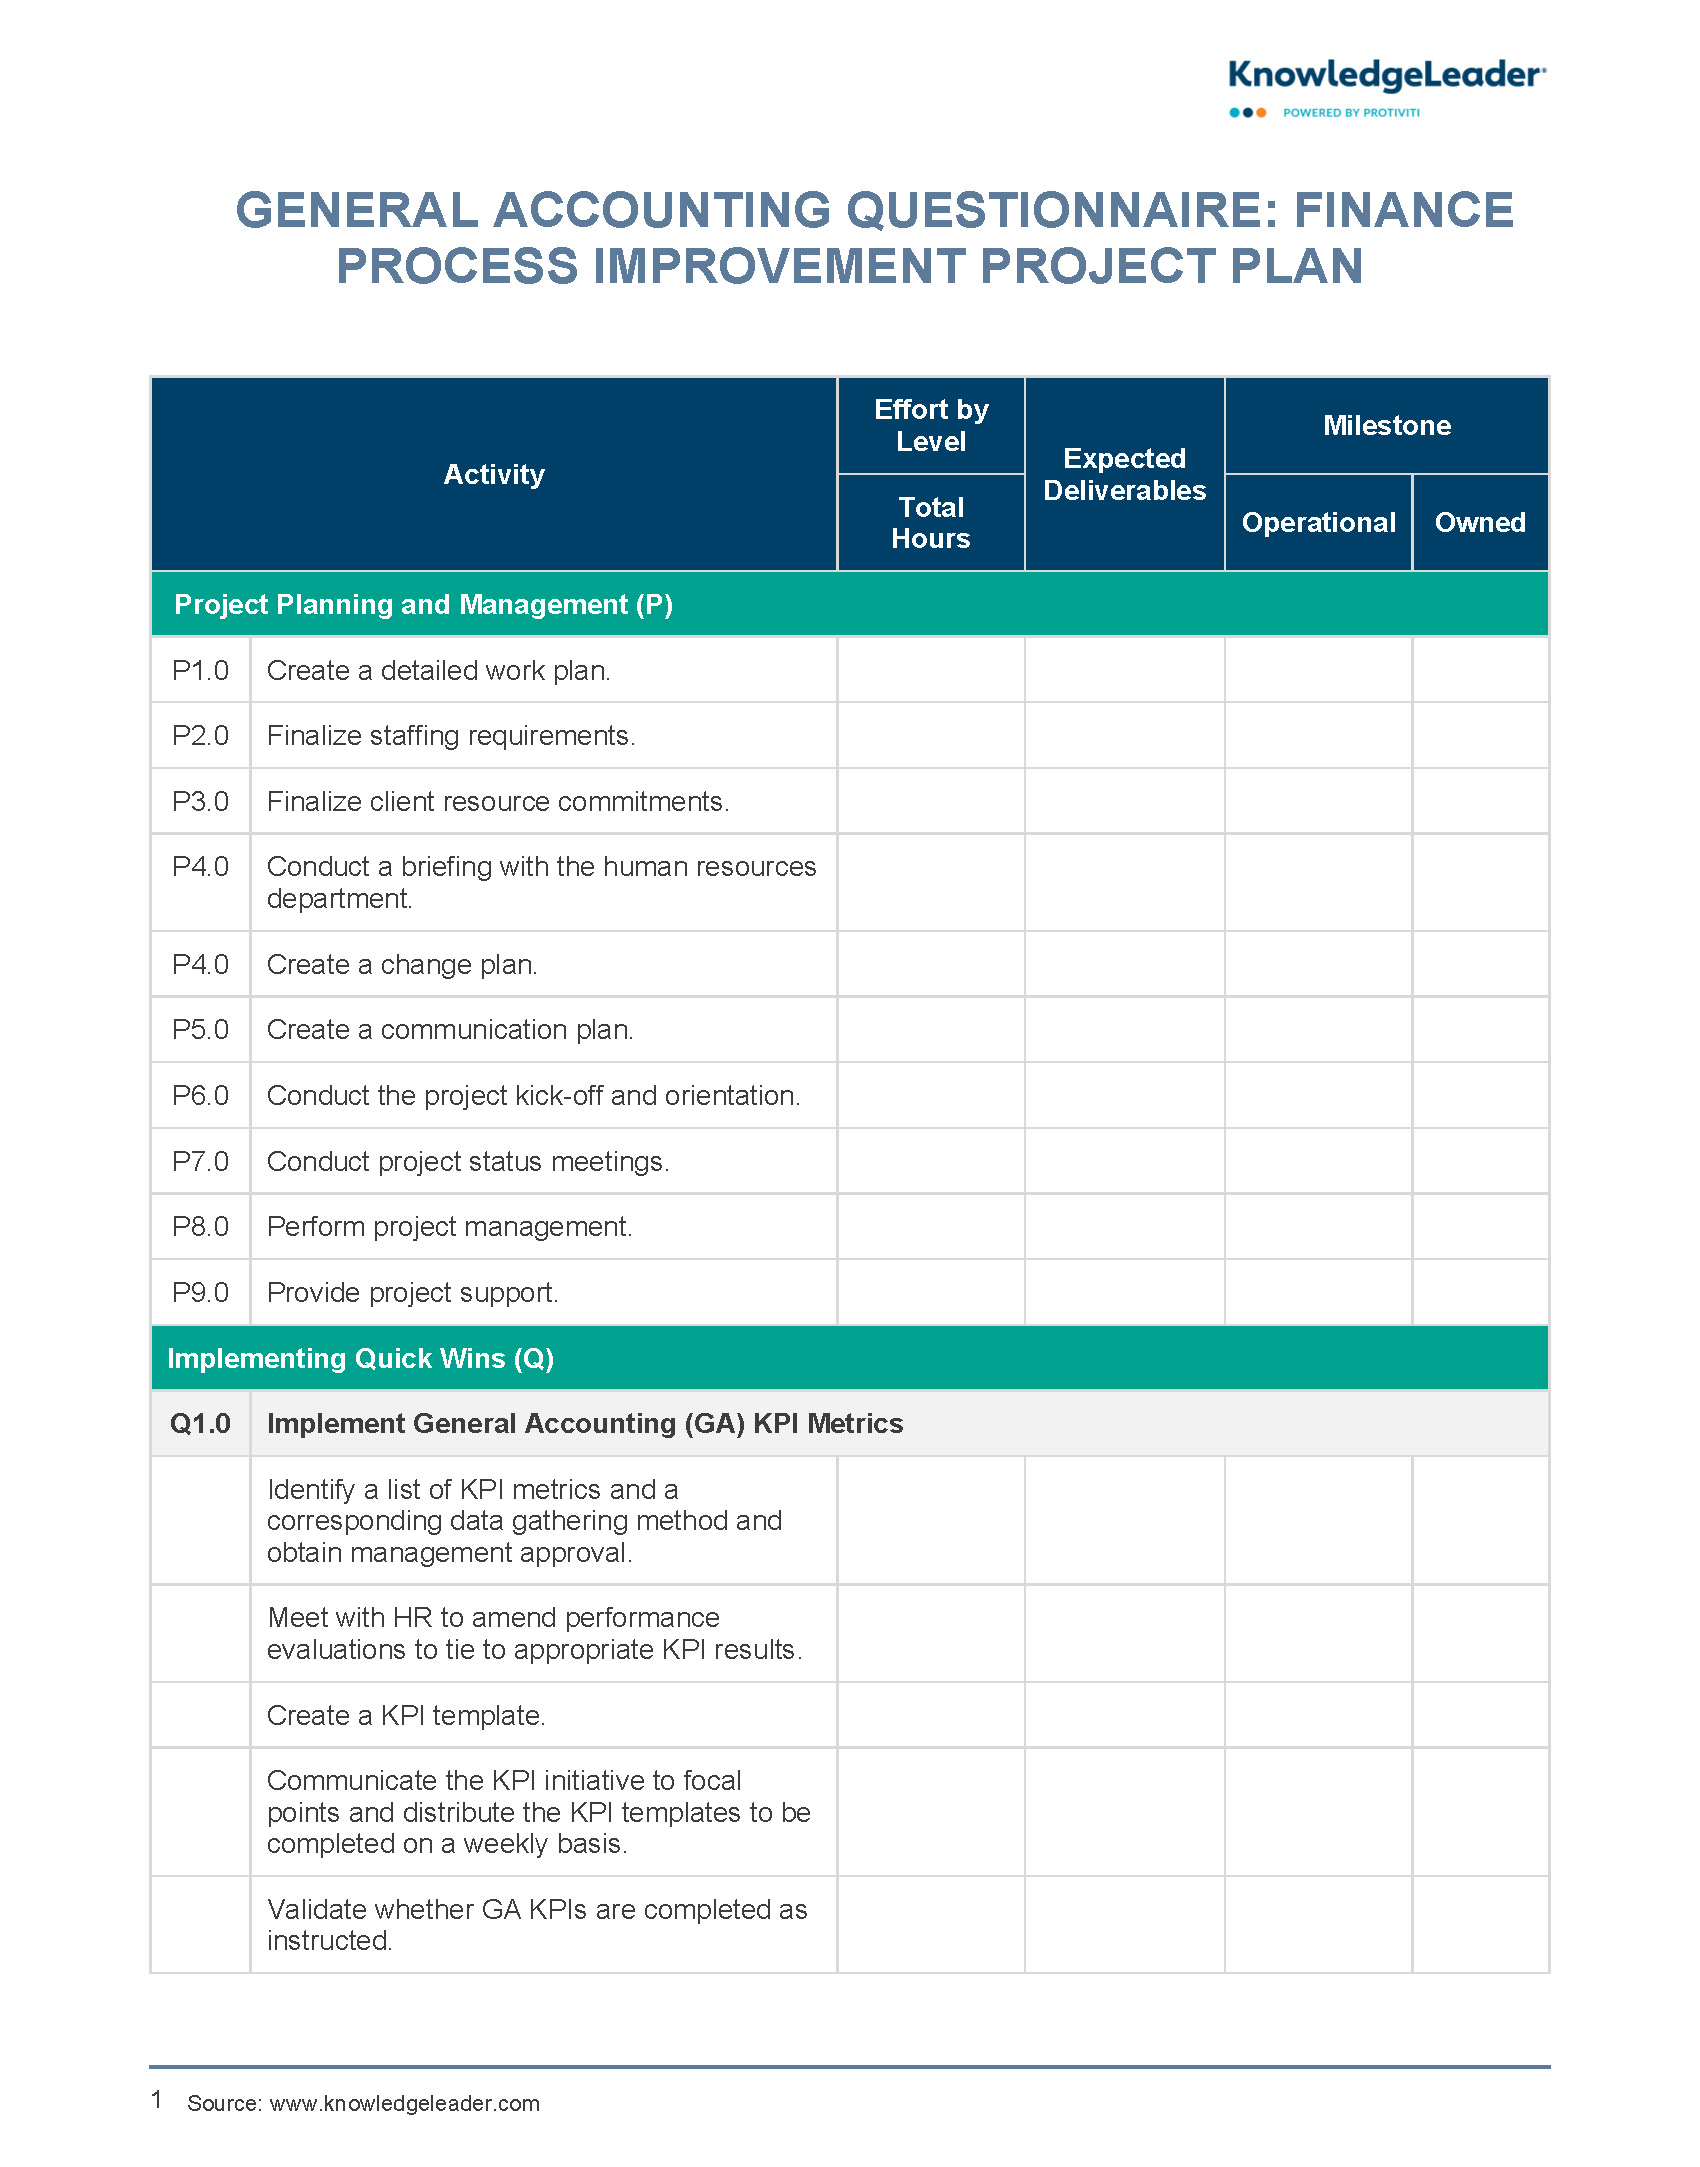 General Accounting Questionnaire - Finance Process Improvement Project Plan